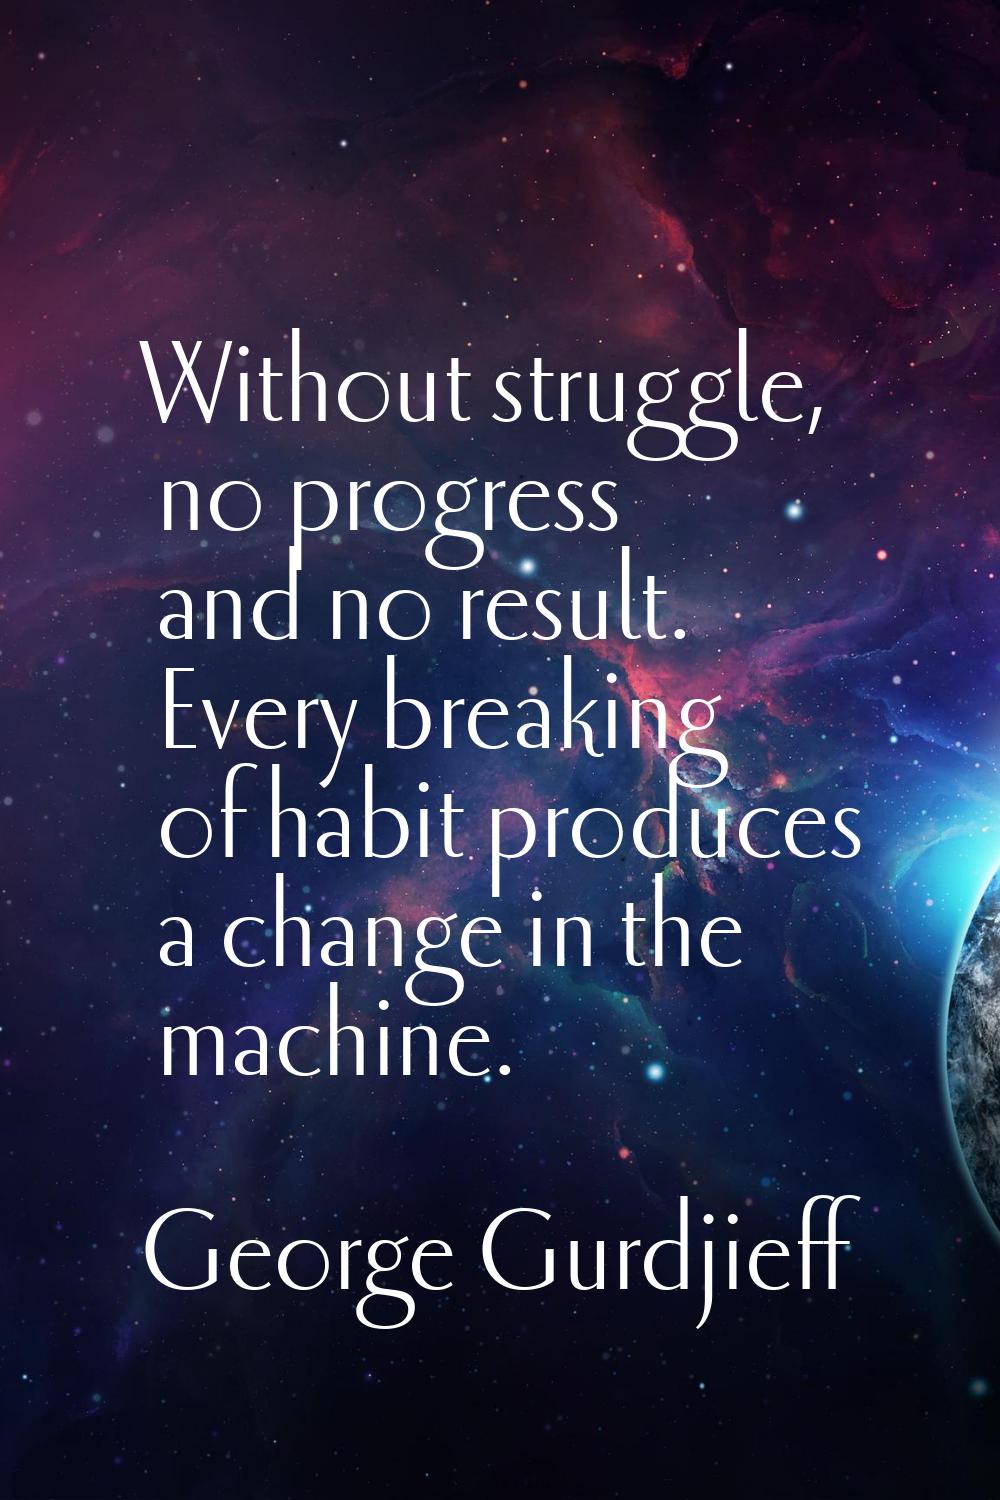 Without struggle, no progress and no result. Every breaking of habit produces a change in the machi